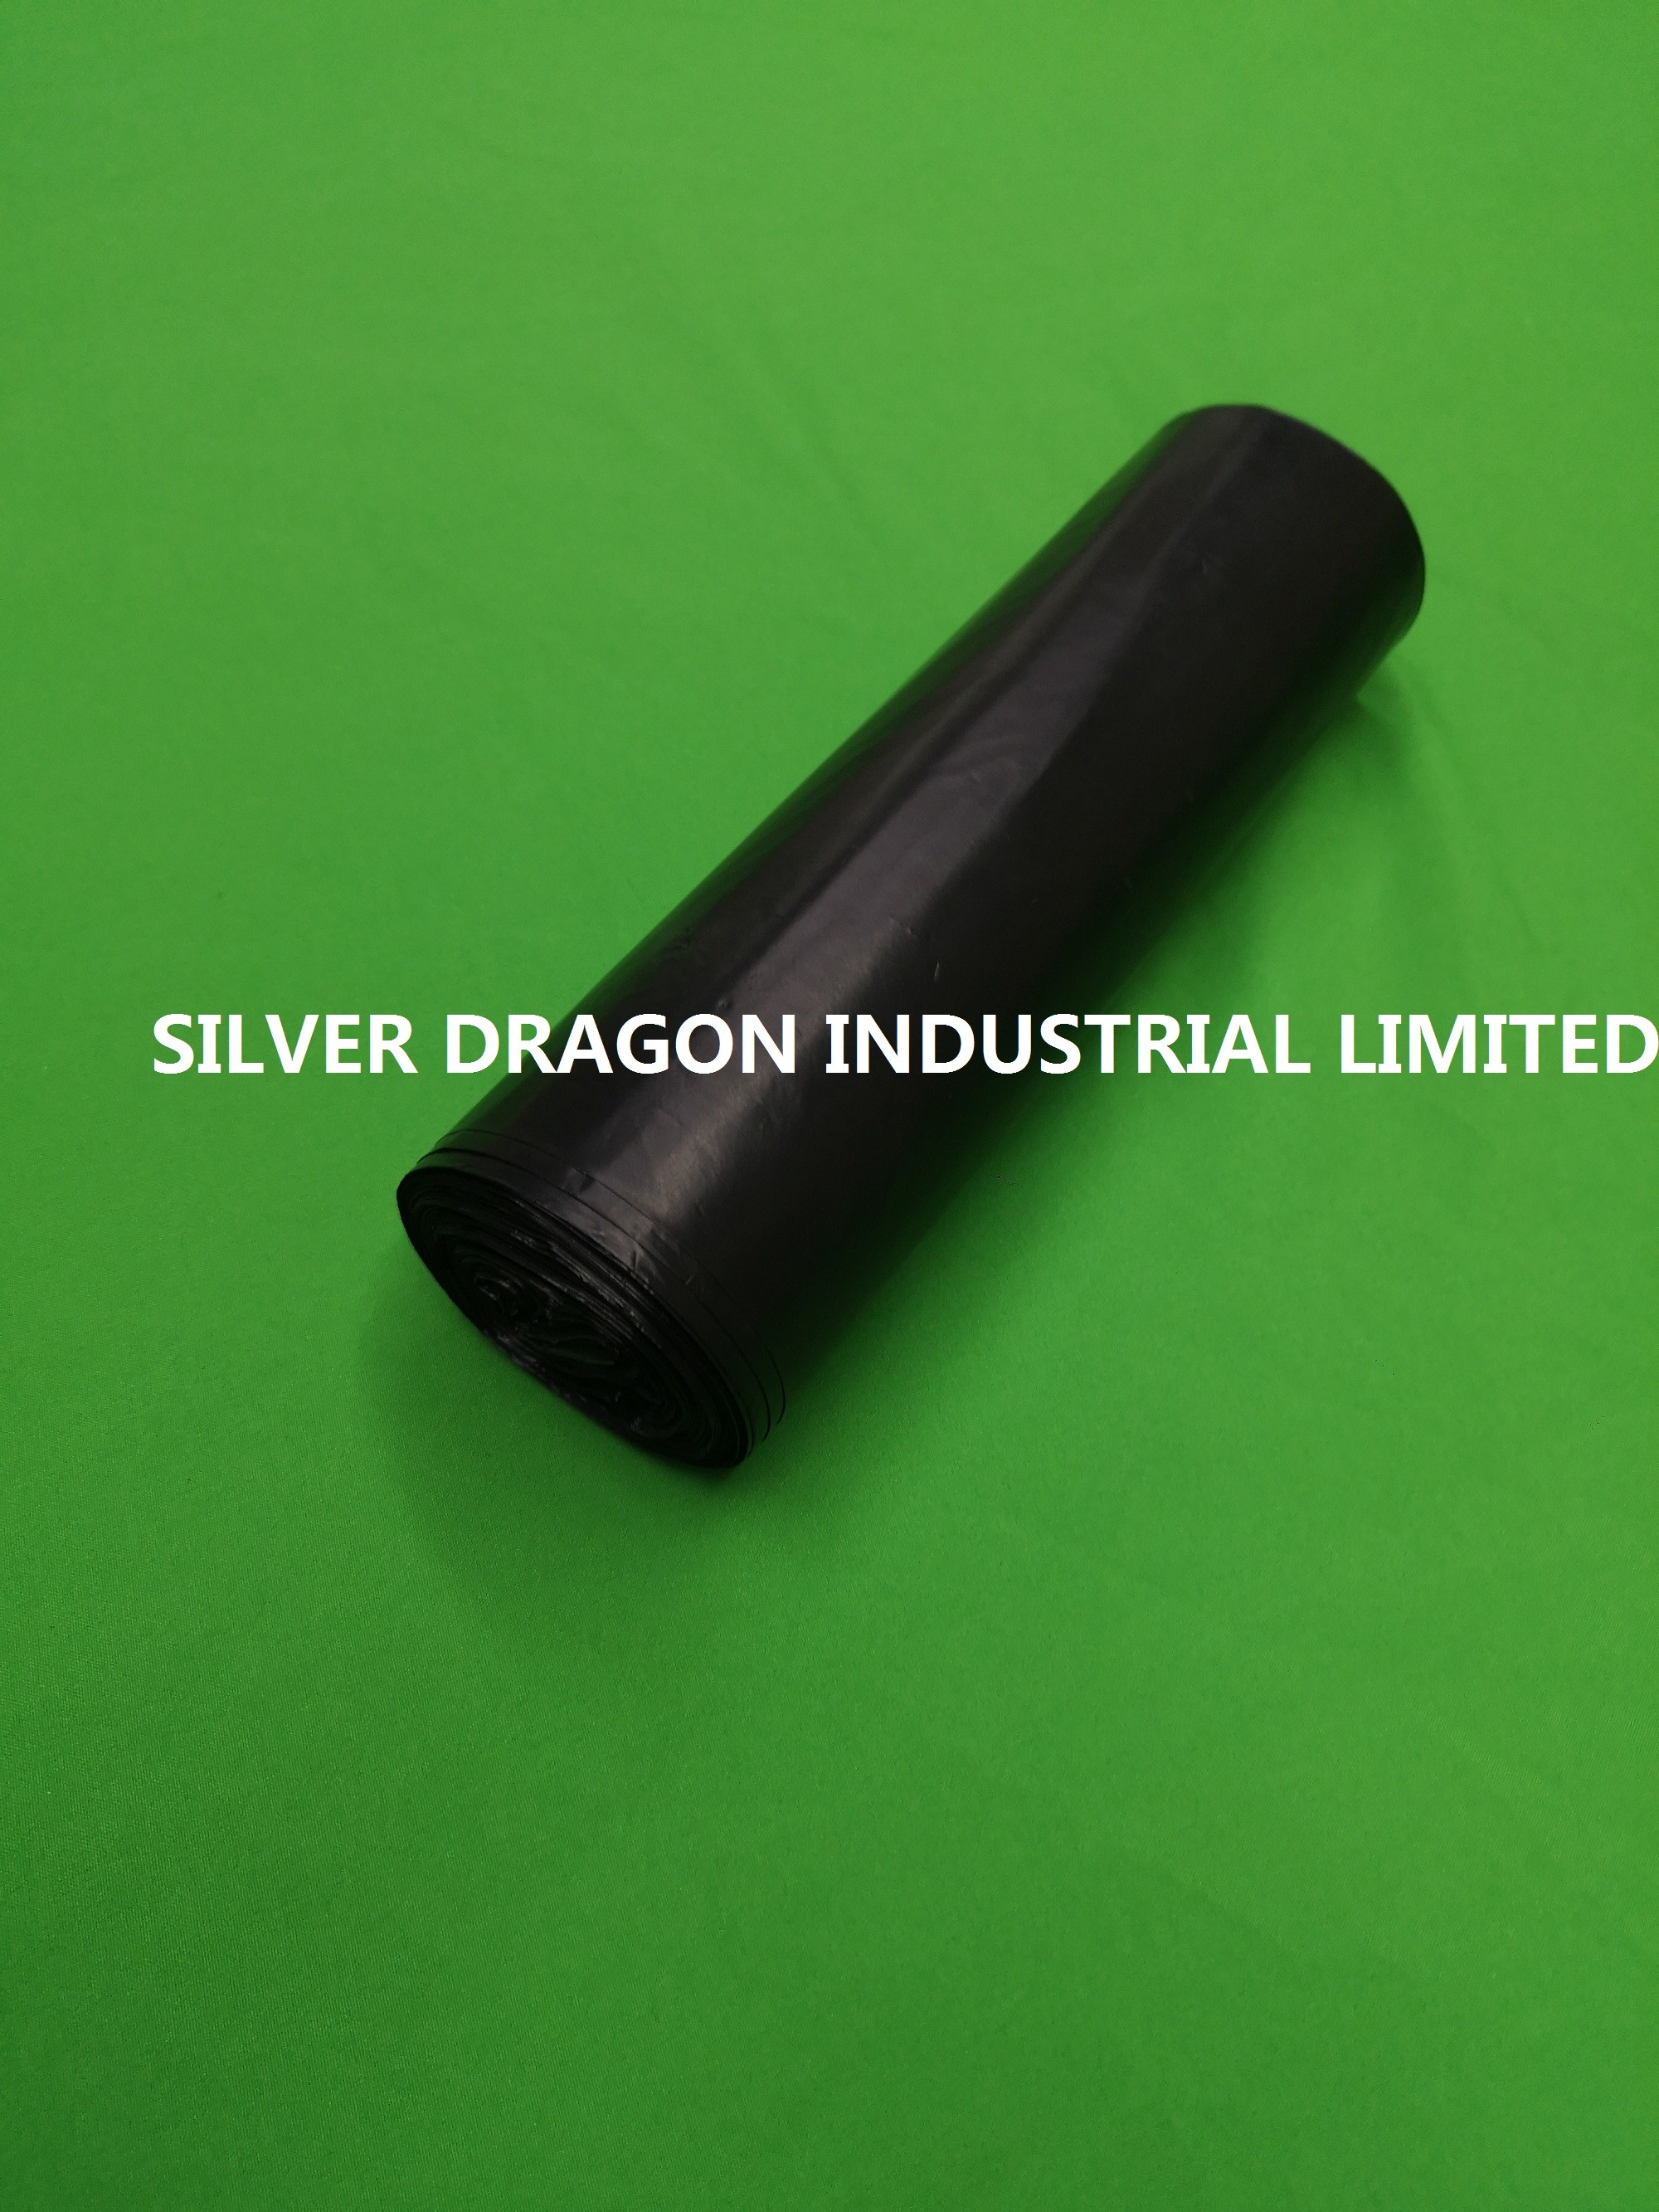 China Heavy duty black HDPE bin liners/garbage bags on rolls, 84x101cm, 30 pcs per roll for sale